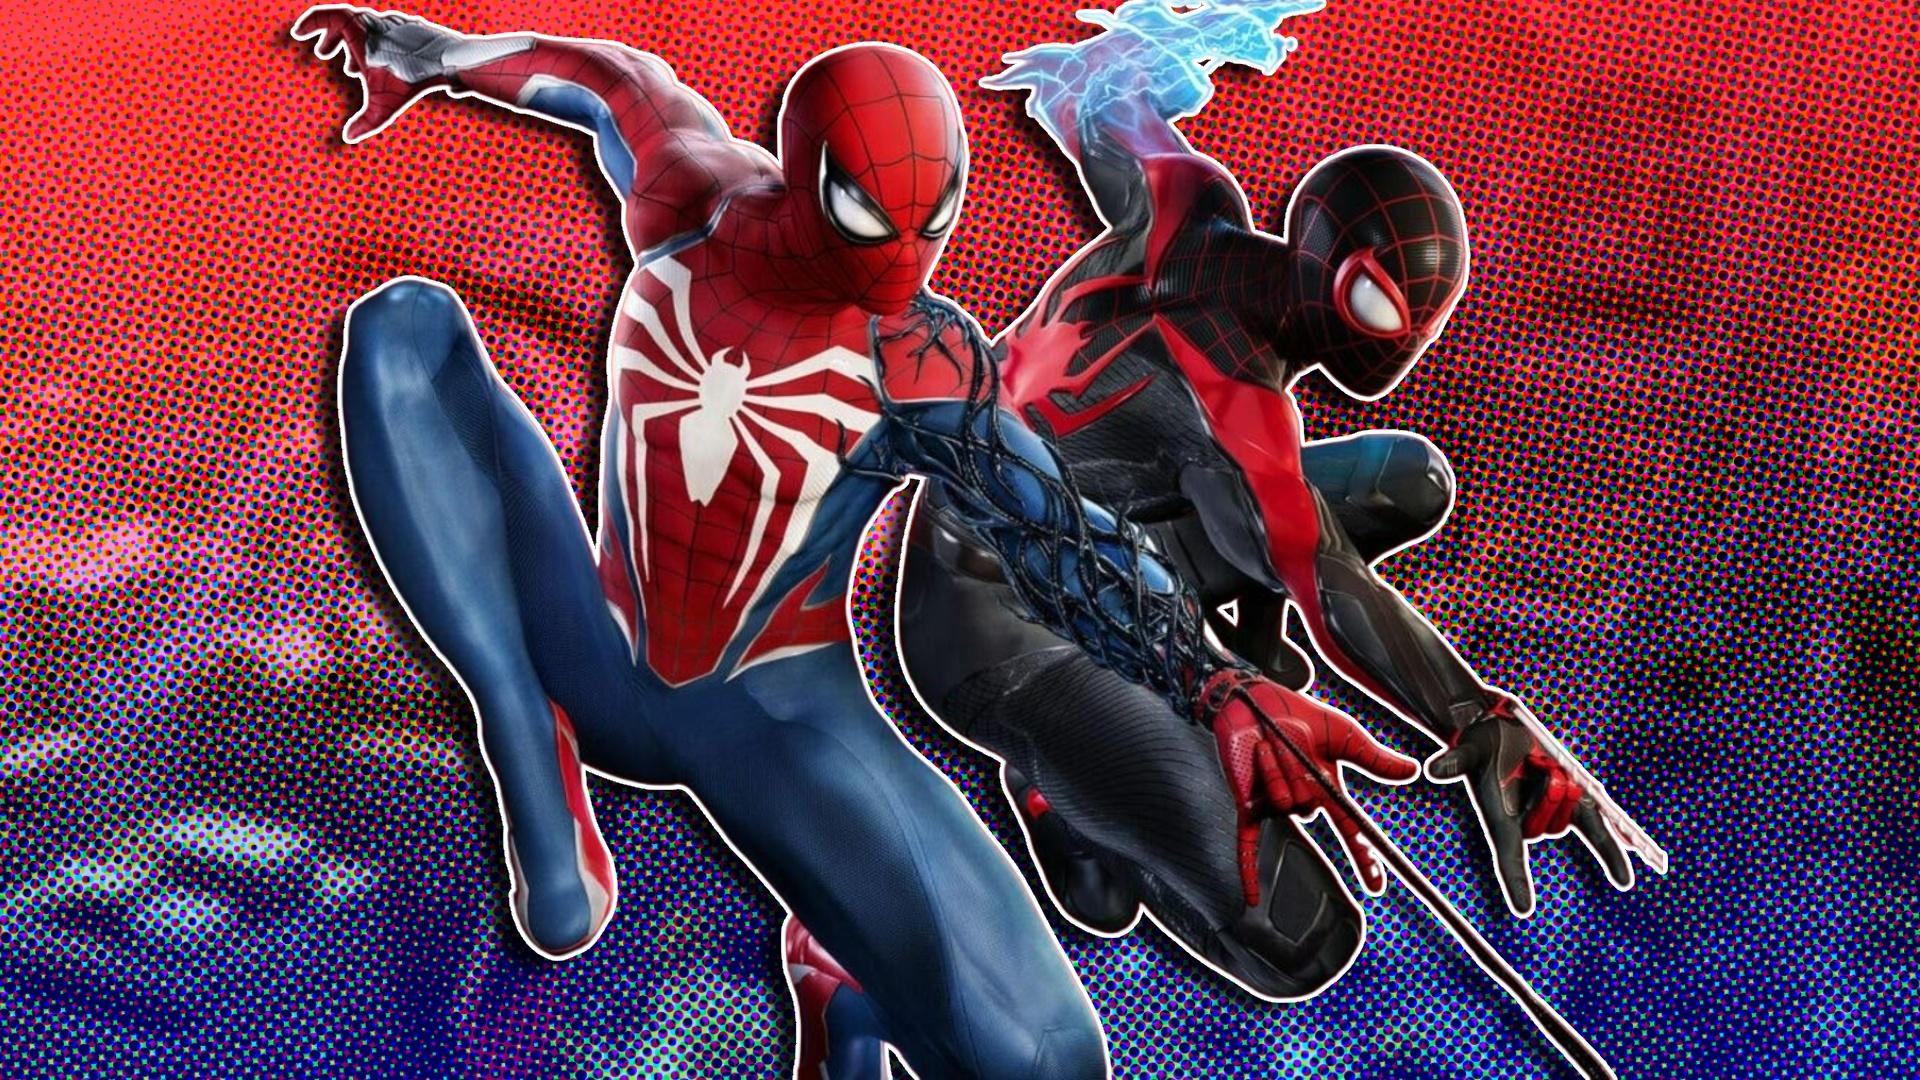 Available Games Online That Feature Spiderman